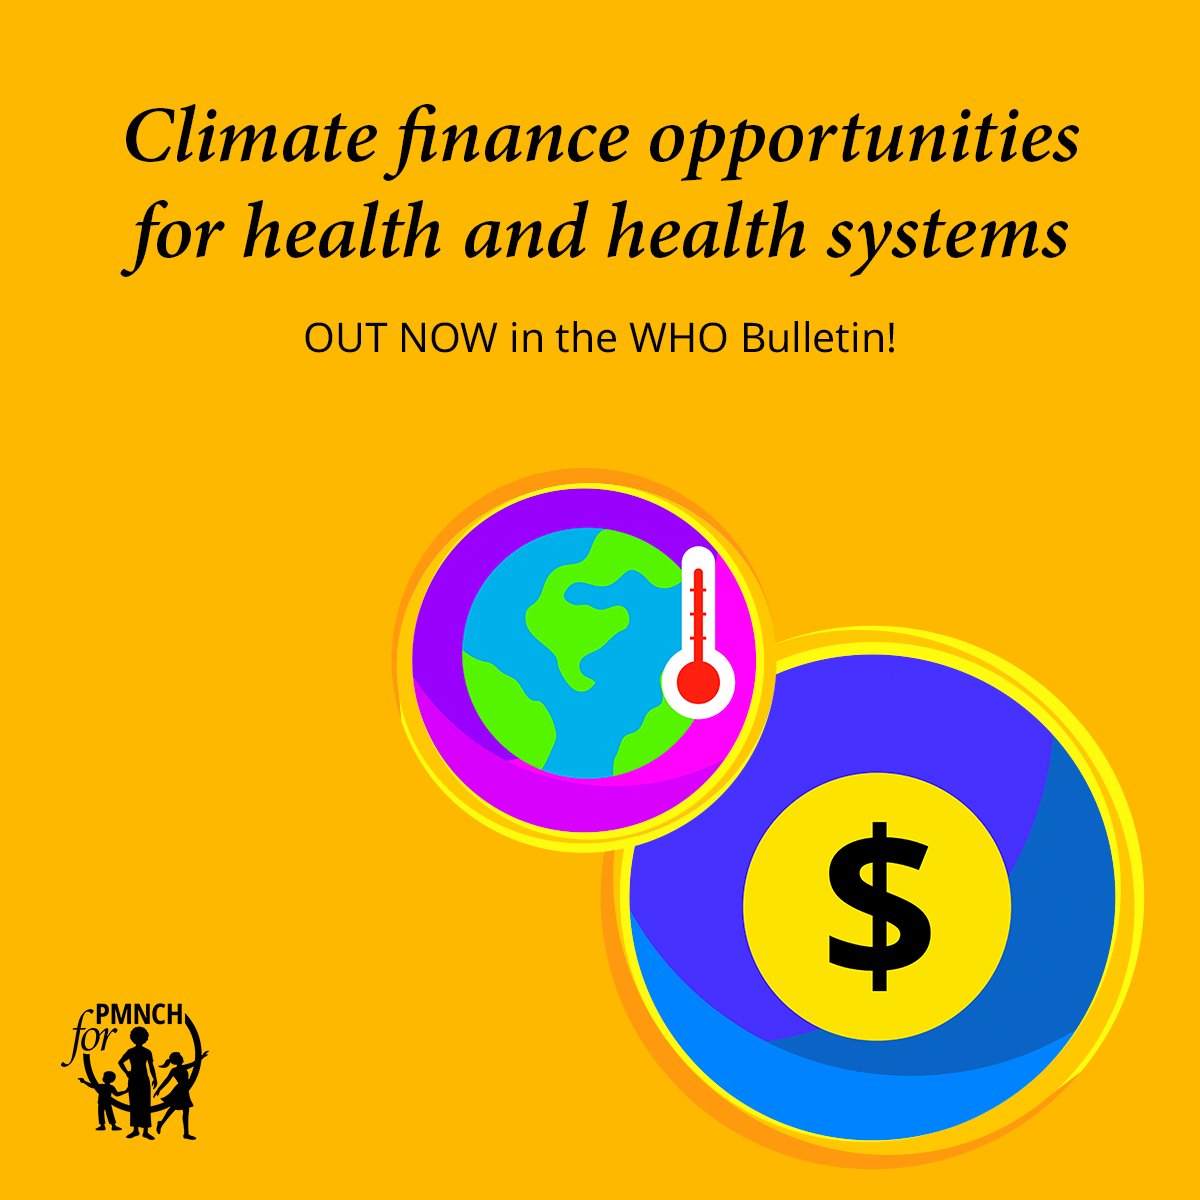 🚀 Out now! PMNCH new paper on #climatefinance opportunities for #health -> financing institutions must prioritize co-designed climate & health financing & improve accessibility to address the needs of vulnerable communities at the frontline of the climate & health crisis. Read…